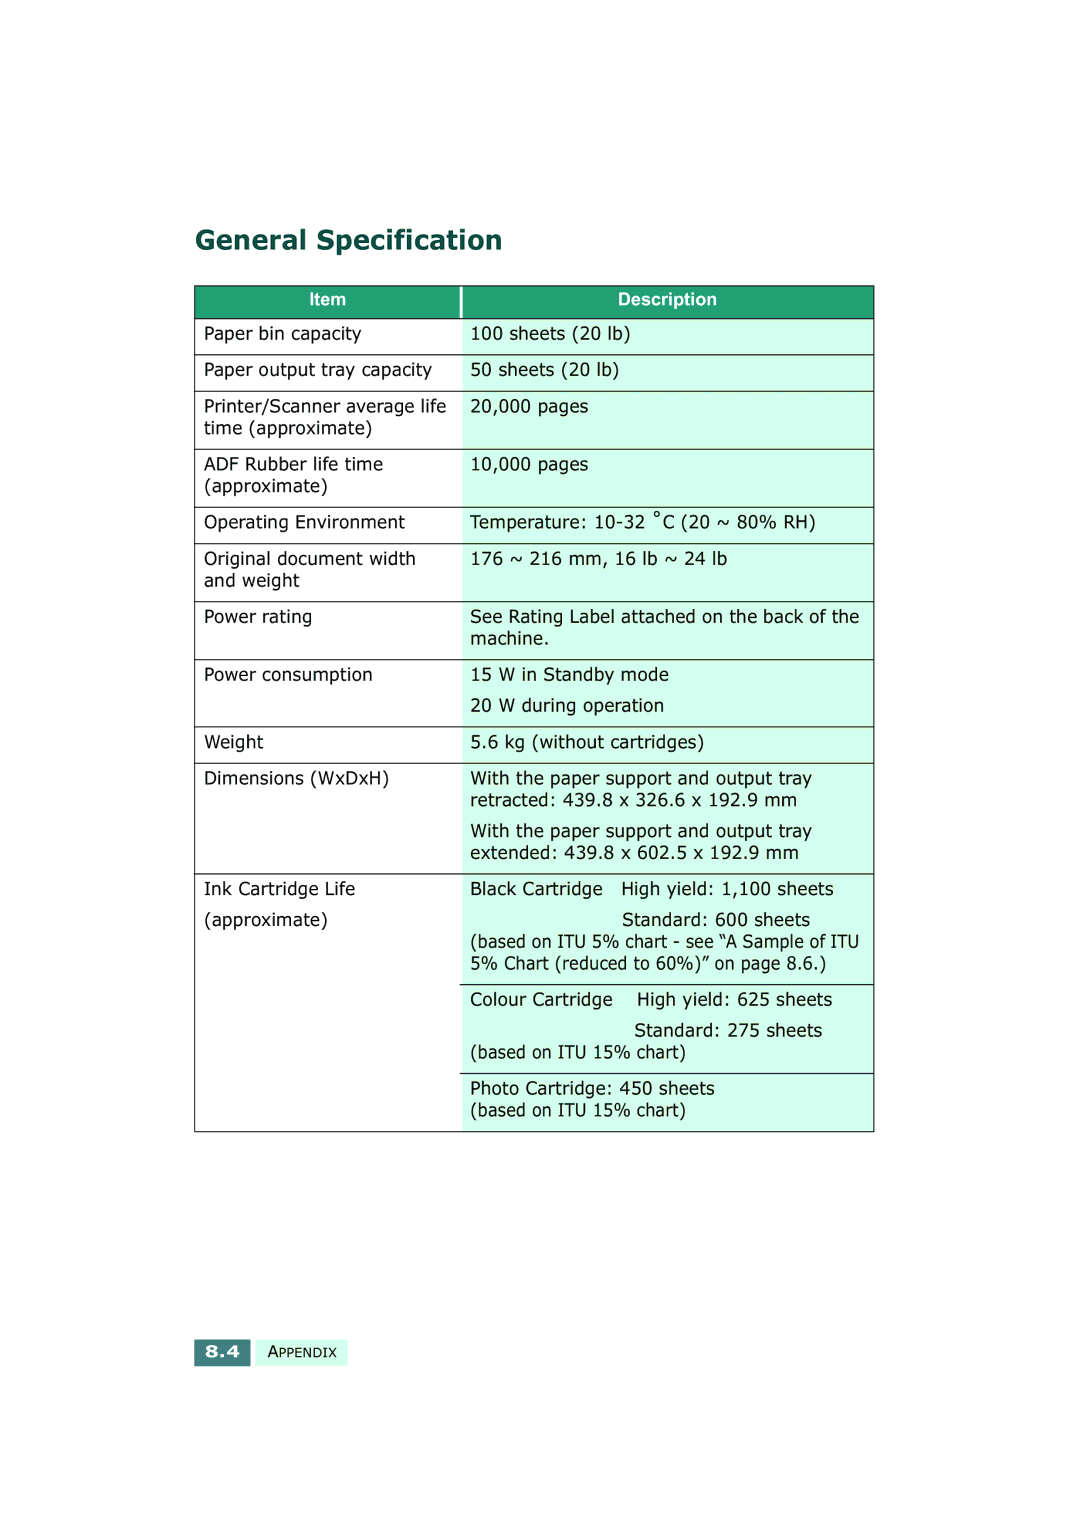 Samsung SF-430 manual General Specification, Chart reduced to 60% on 